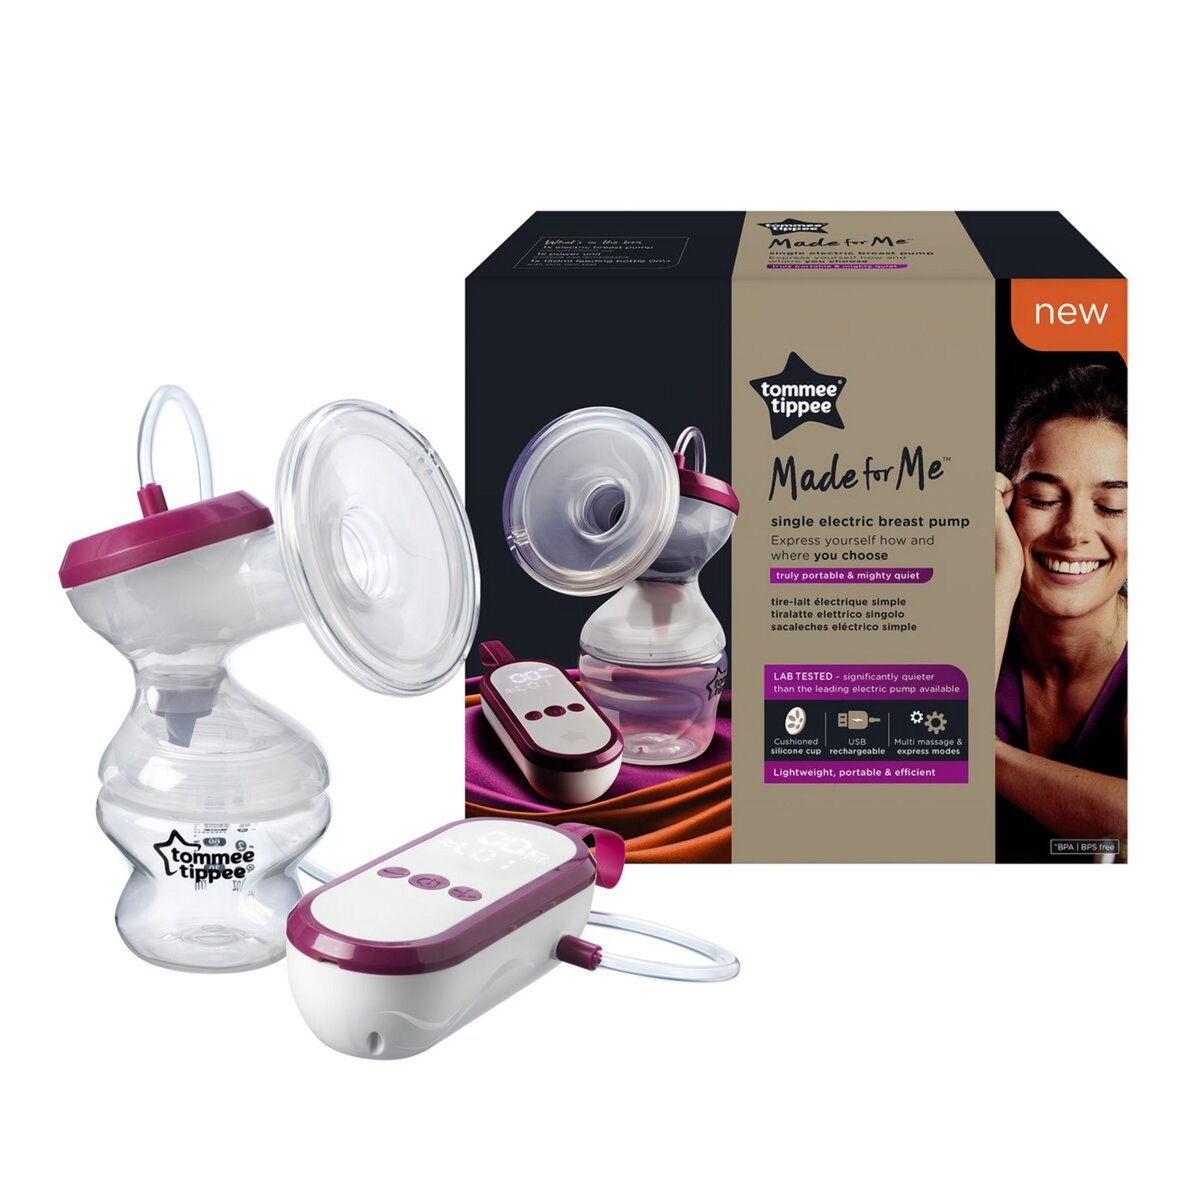 TOMMEE TIPPEE Tire-lait électrique Made for Me